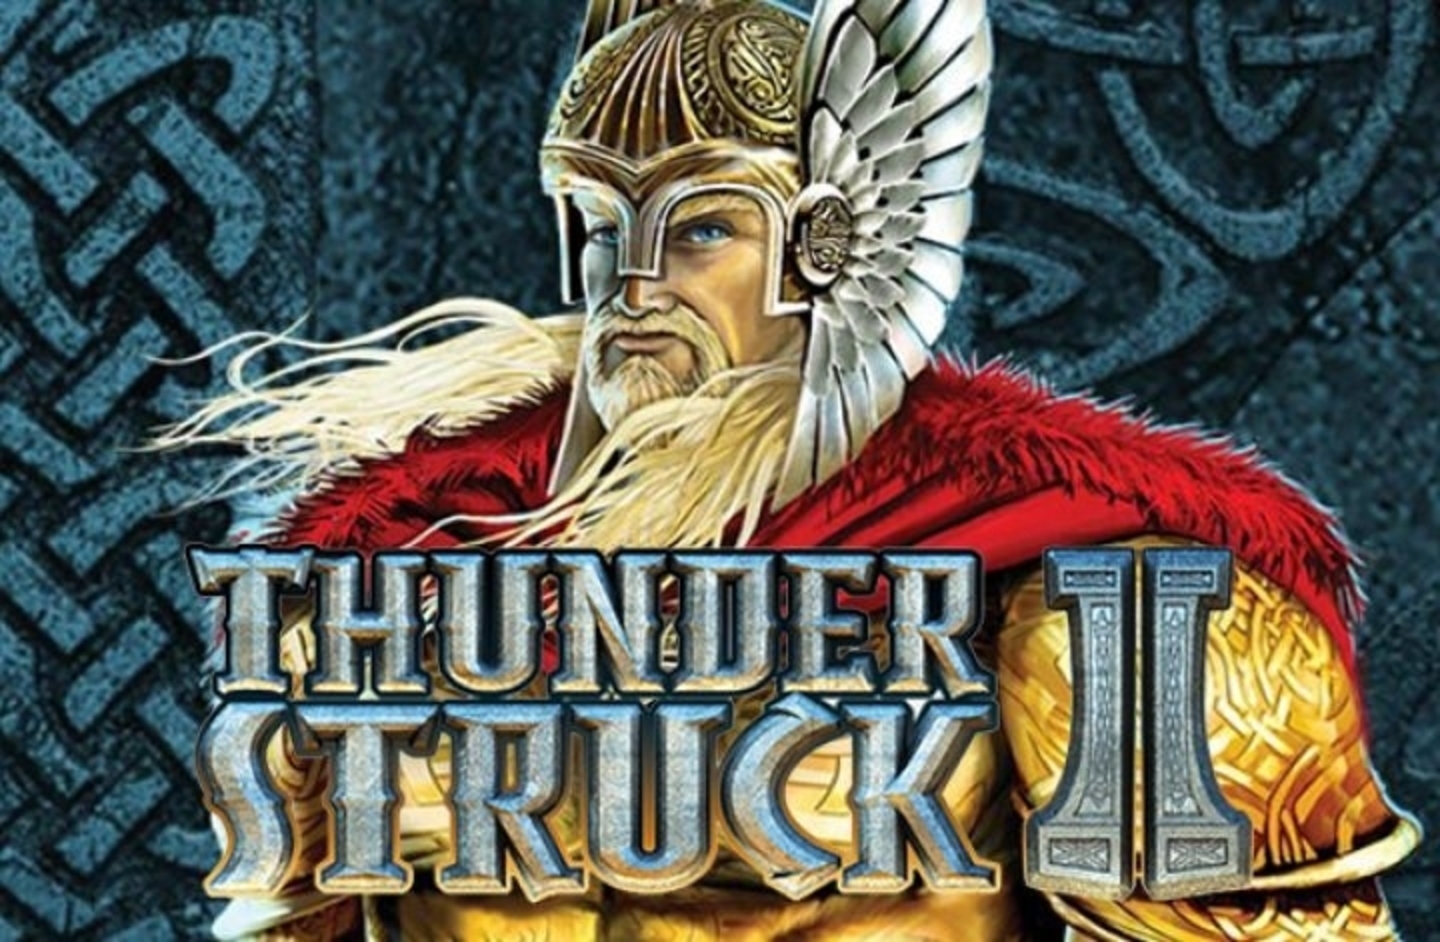 The Thunderstruck II Online Slot Demo Game by Microgaming